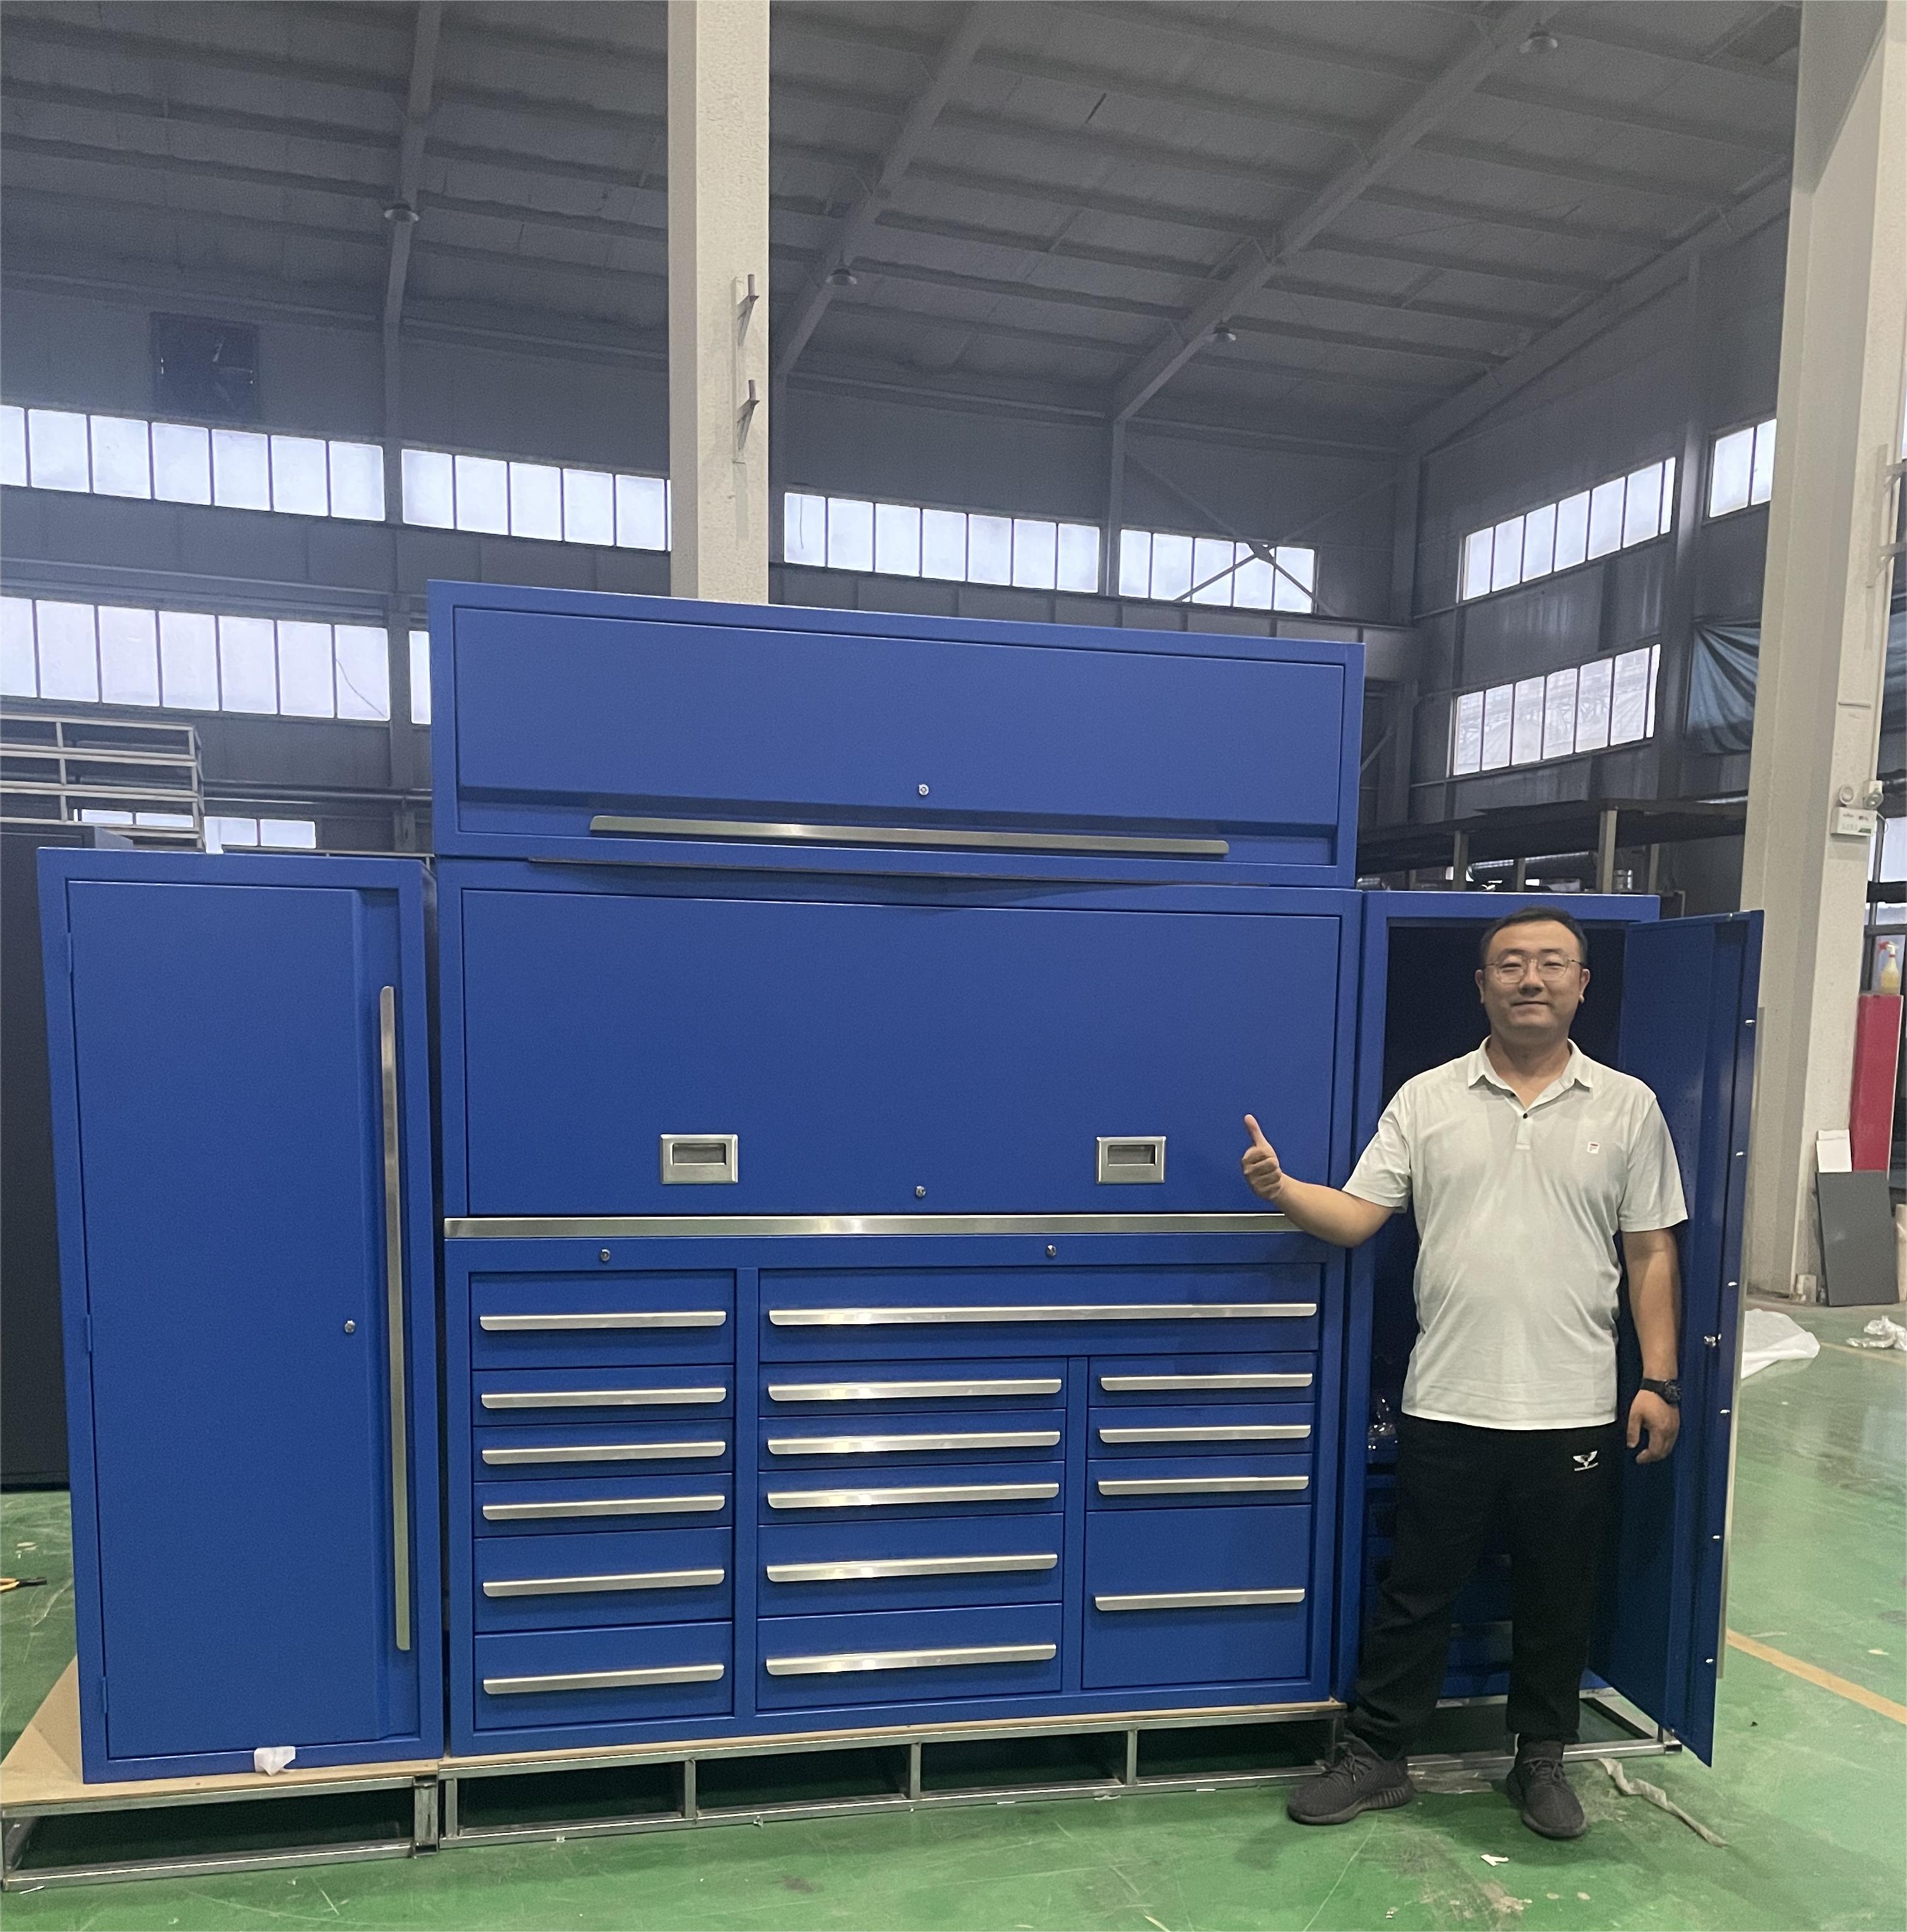 British customer orders several heavy tool cabinets